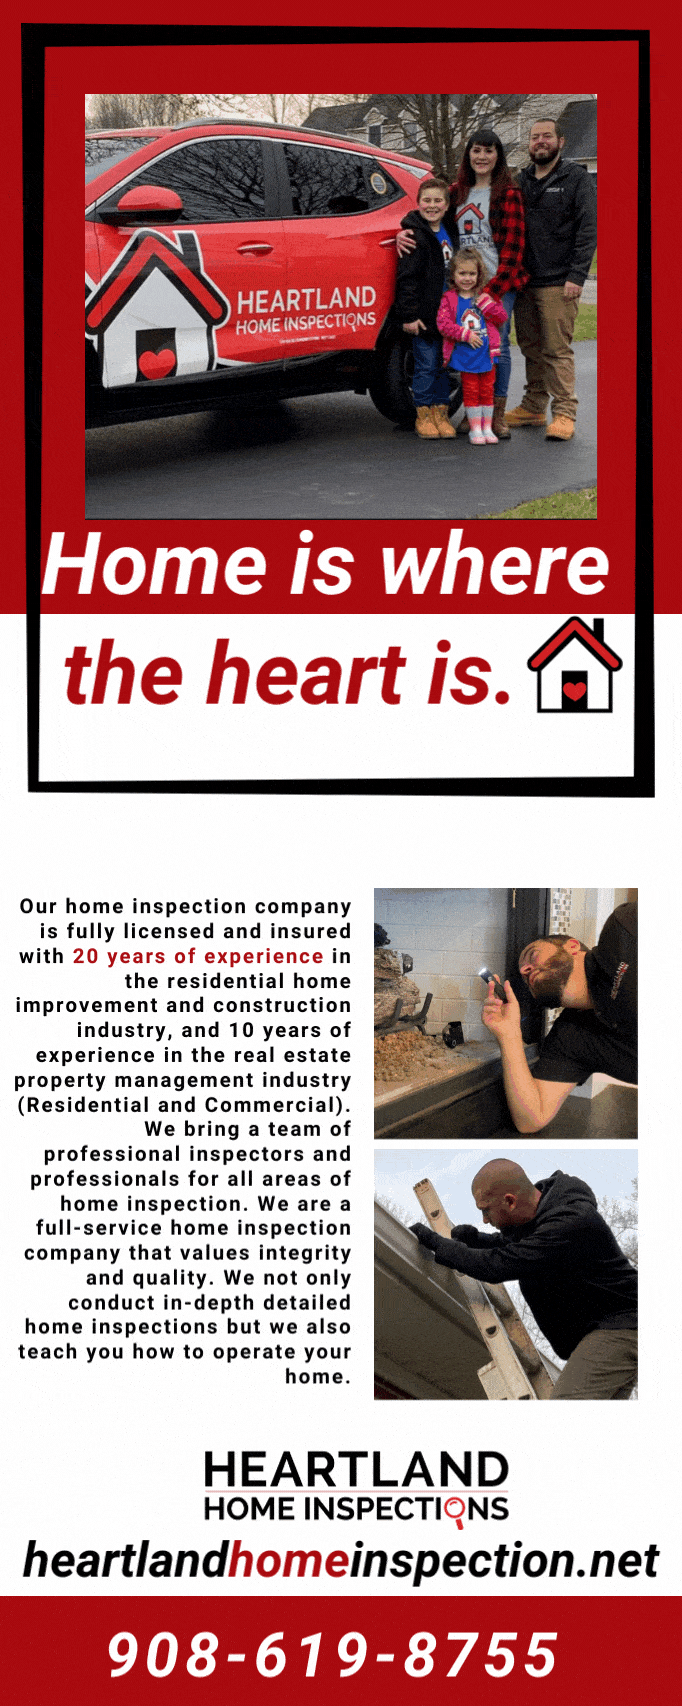 Home Is Where the Heart Is! 3